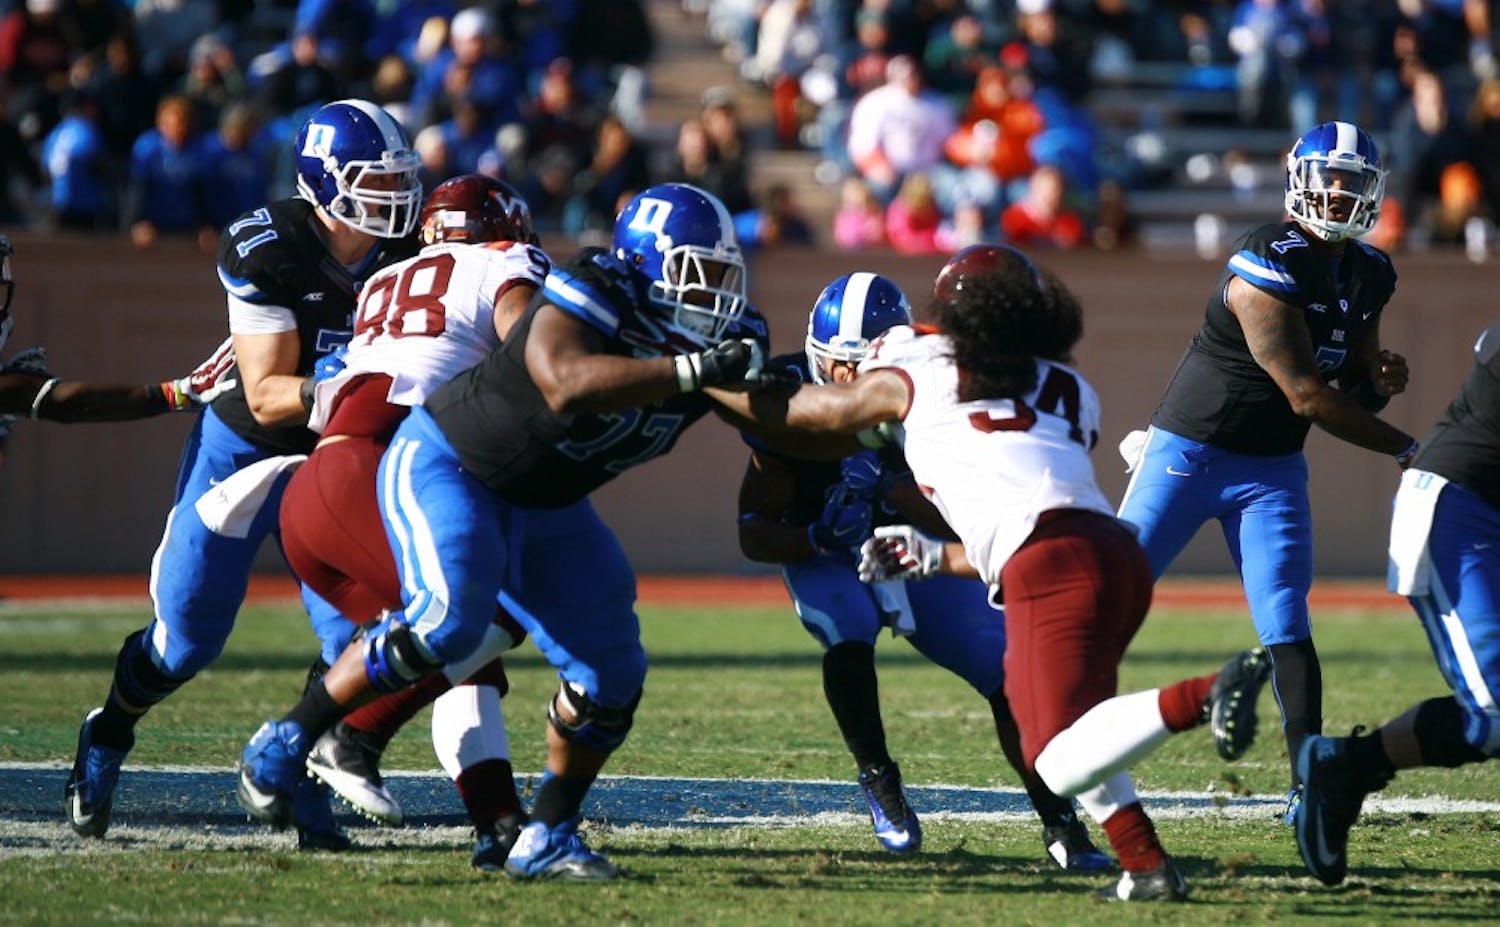 Redshirt senior Laken Tomlinson has started 51 consecutive games for Duke and is set to be a first-round draft pick in the 2015 NFL Draft.